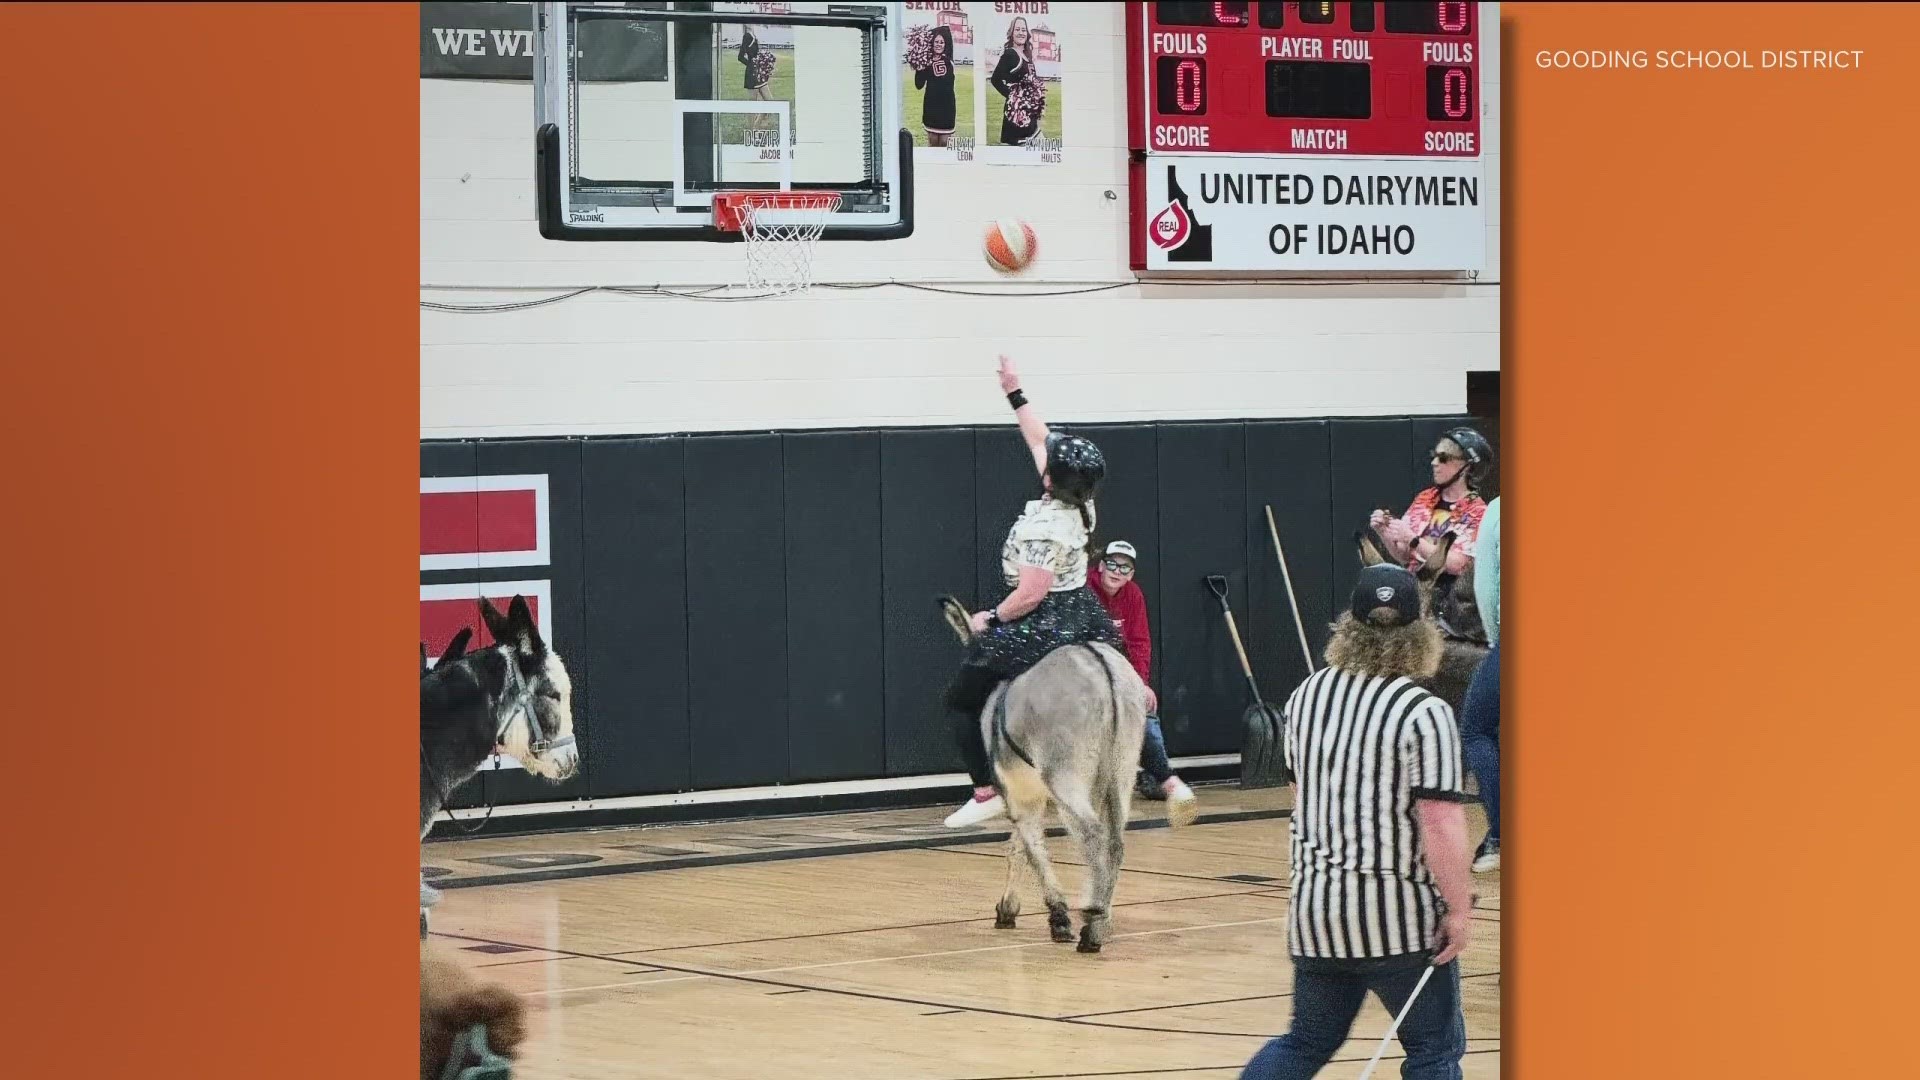 The Gooding School District put on a game of donkey basketball.